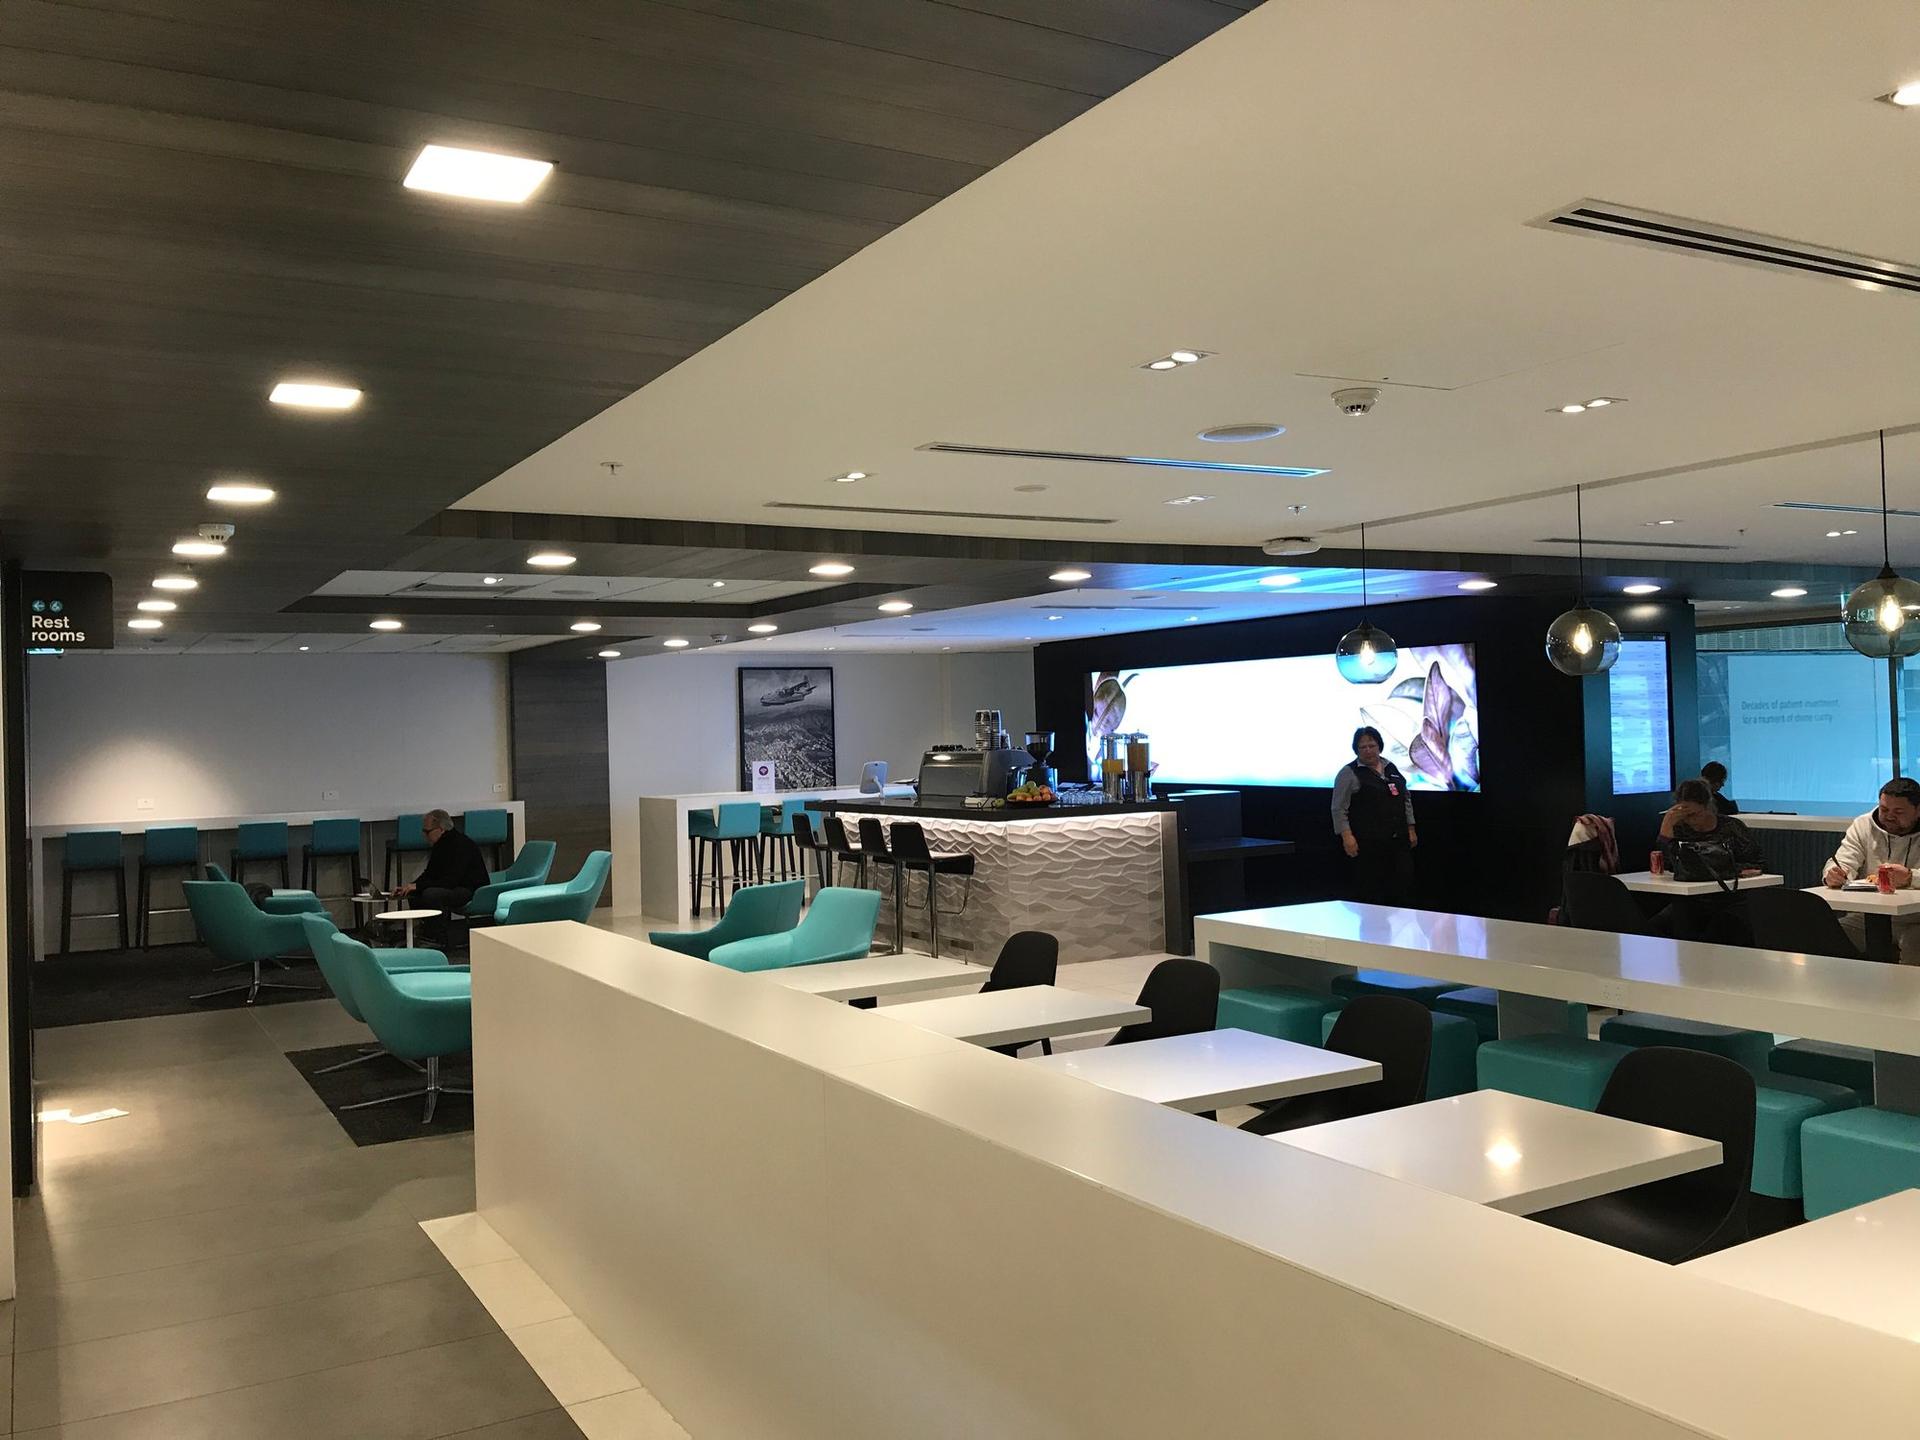 Air New Zealand Regional Lounge image 3 of 8